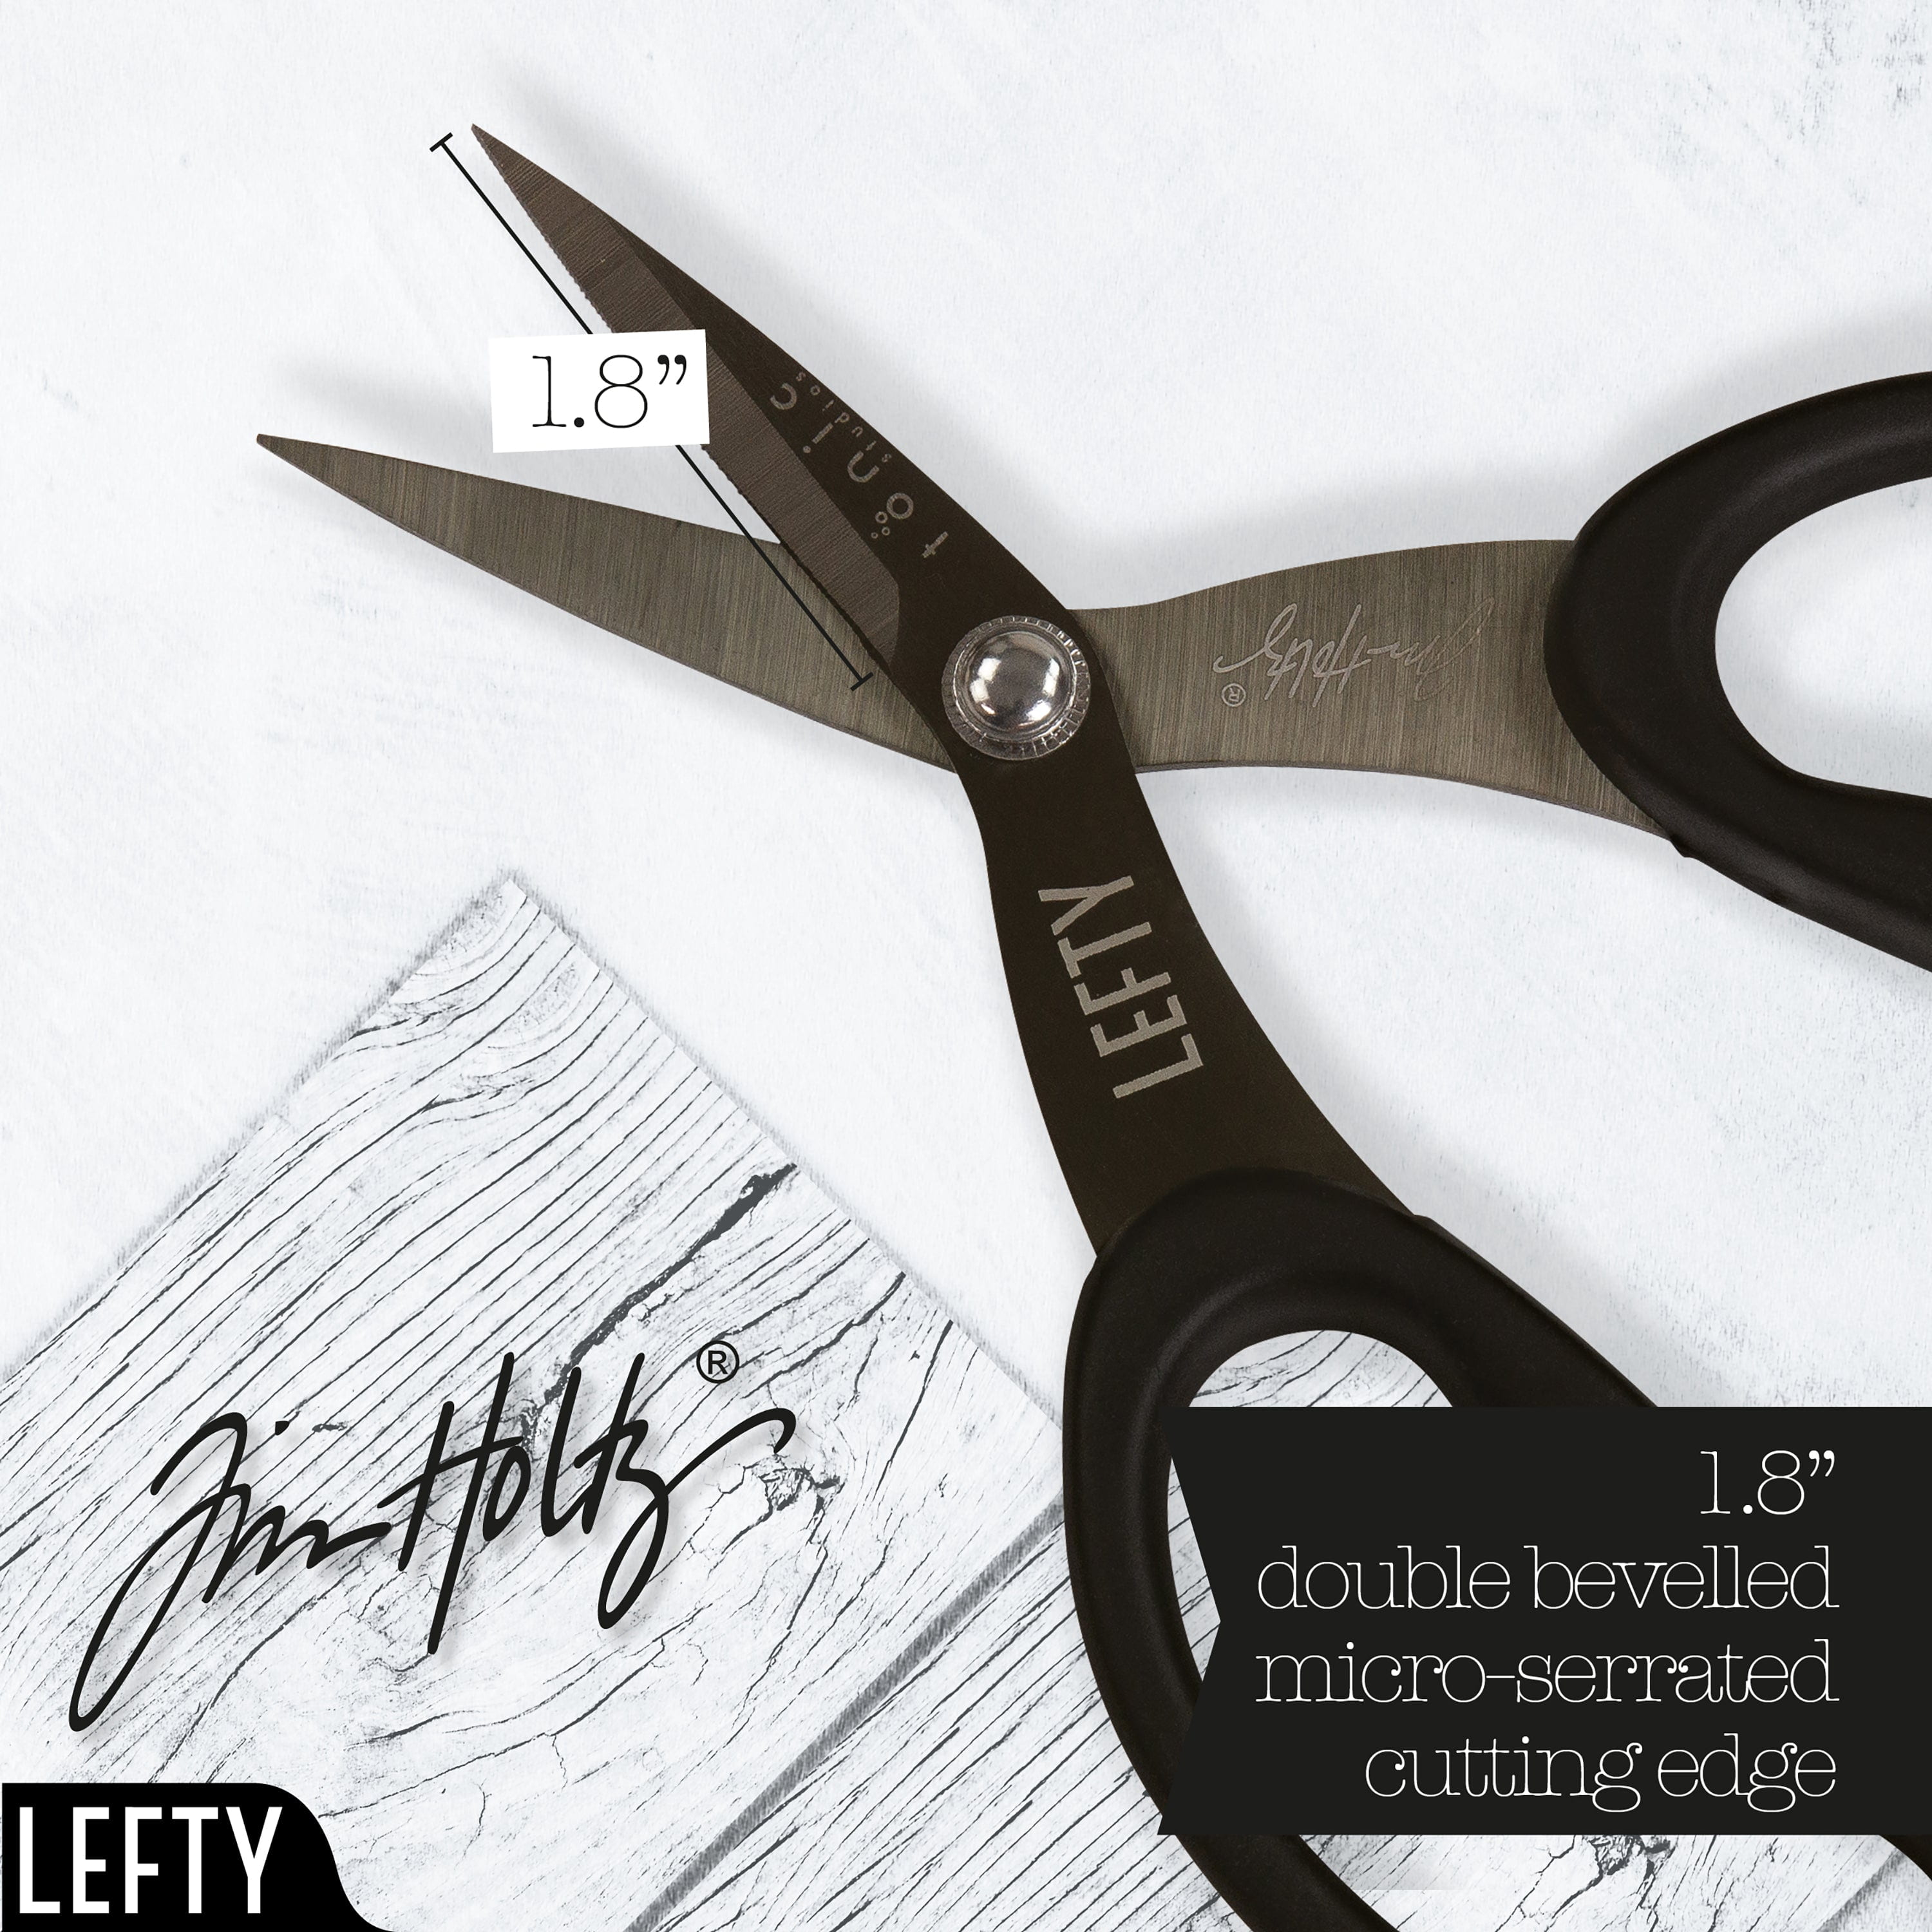 lefty scissors Archives - The OT Toolbox